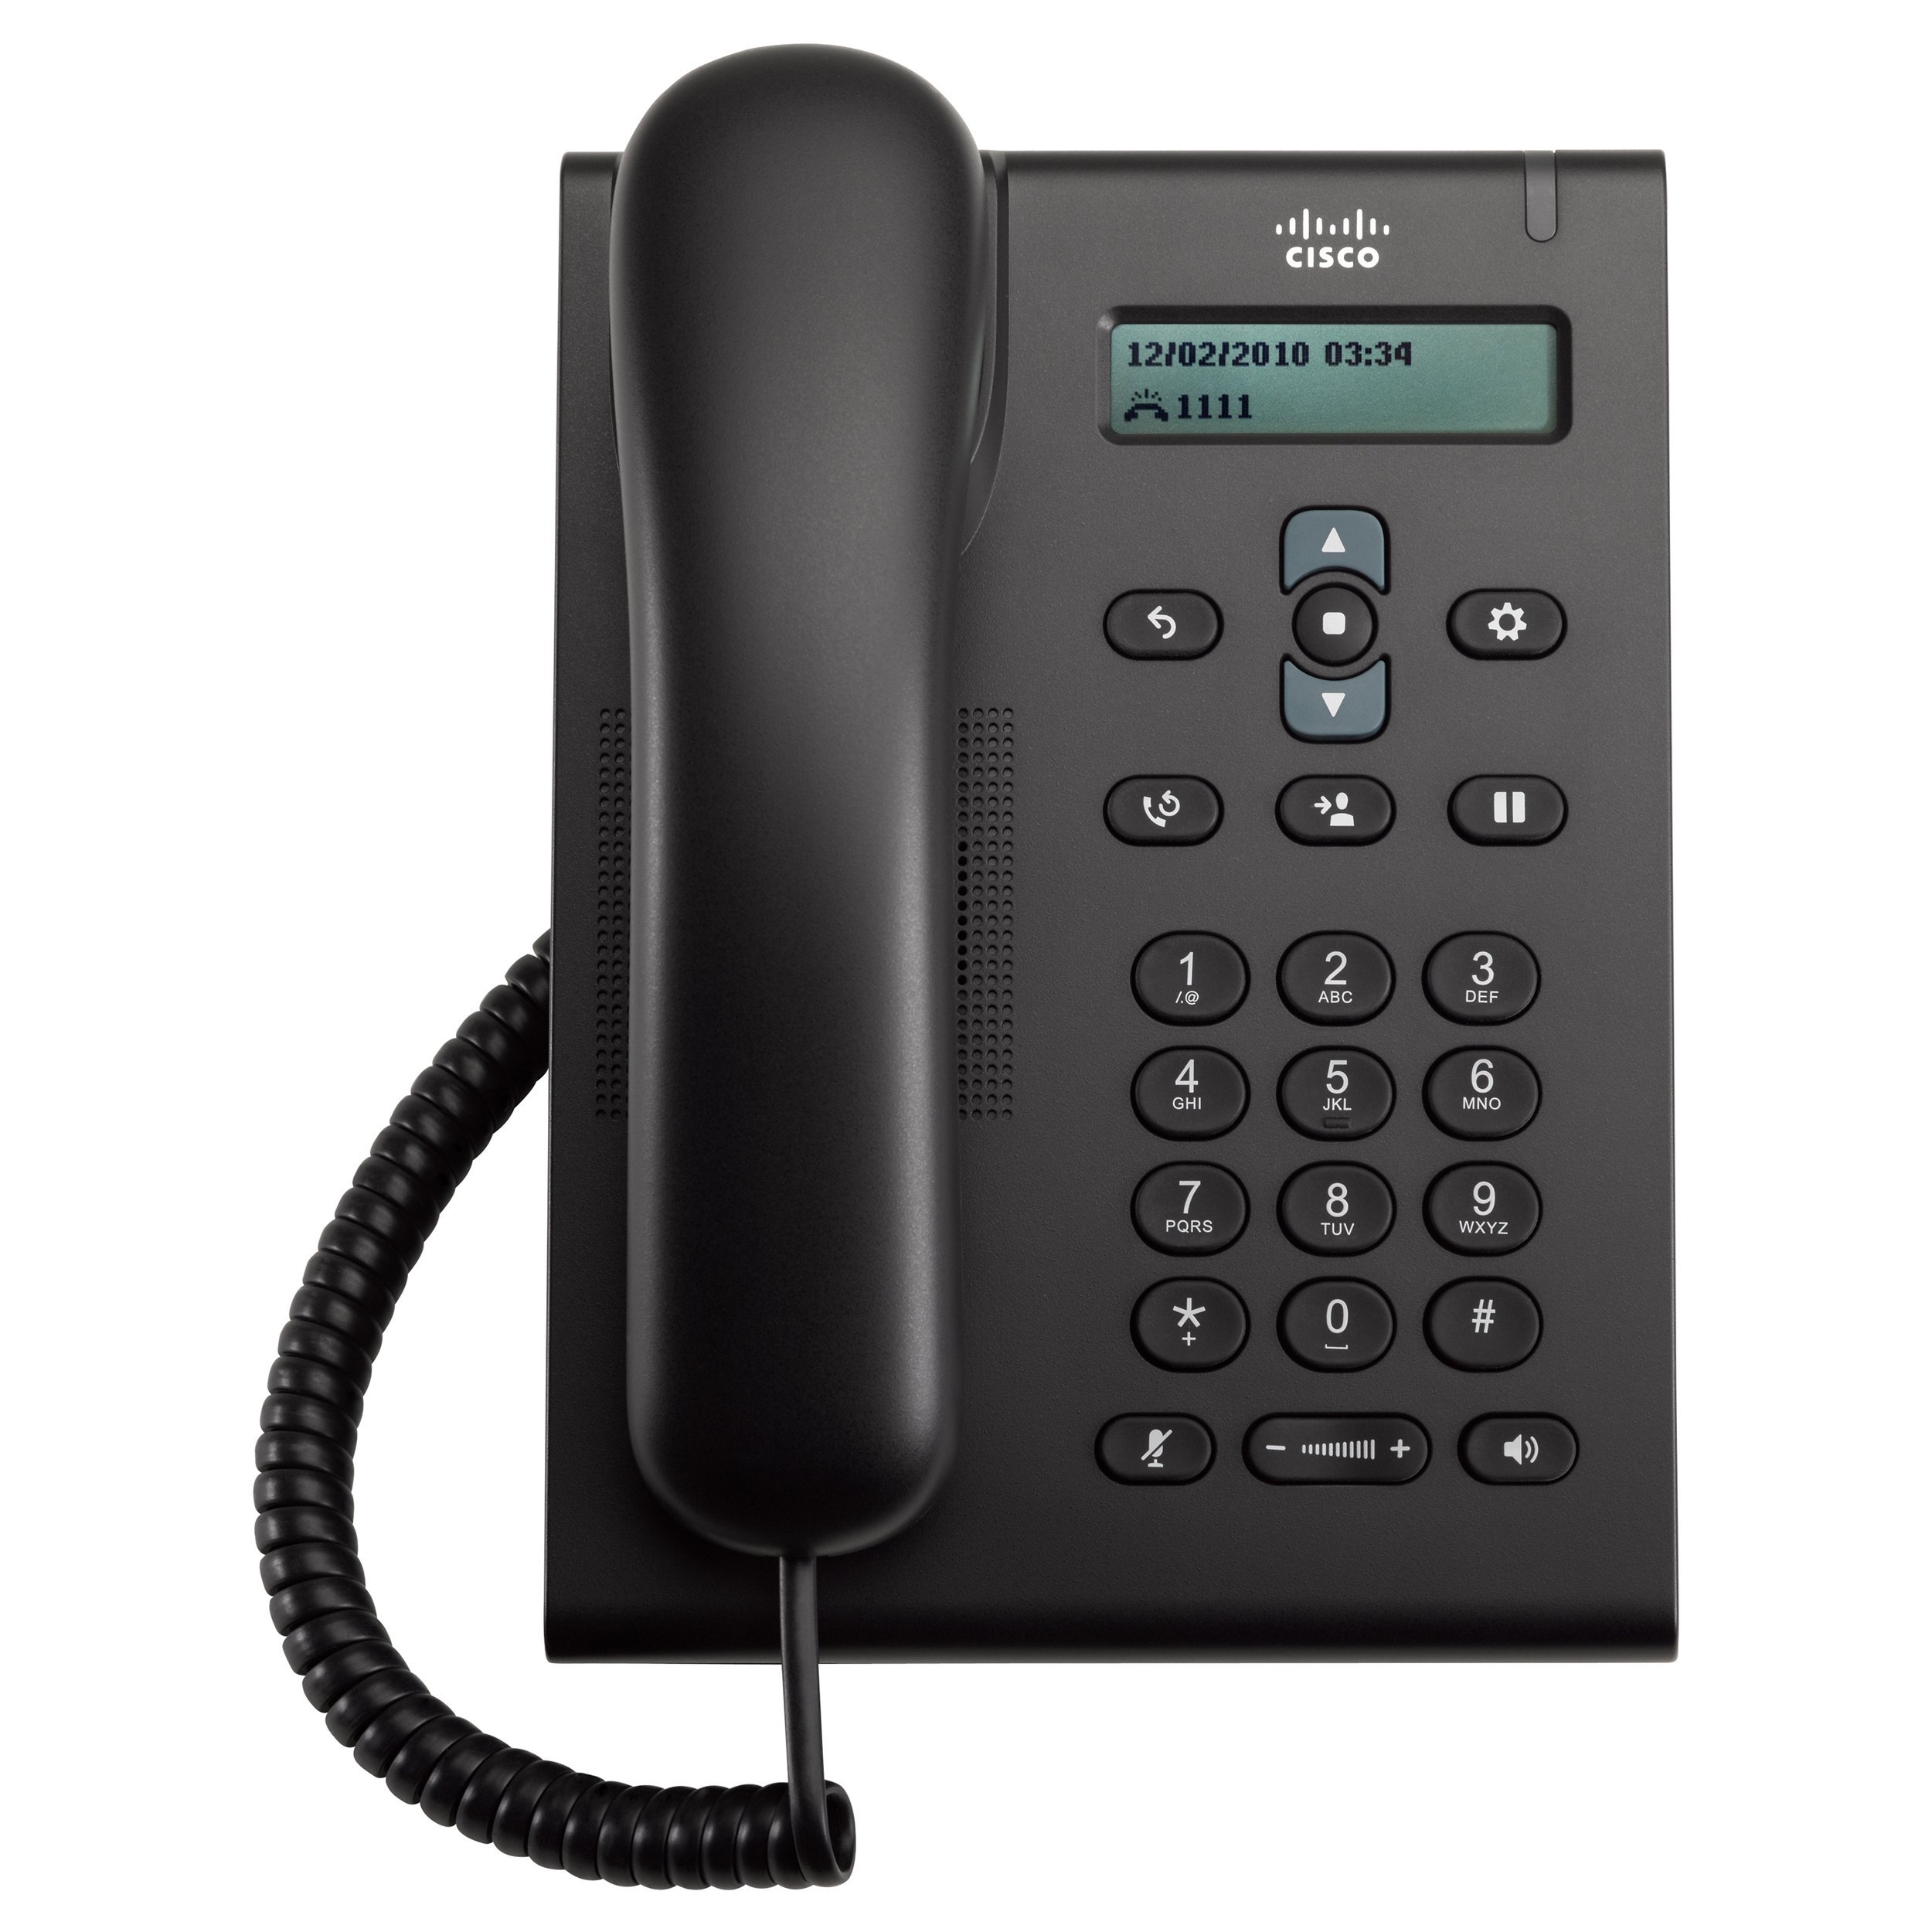 CISCO UNIFIED SIP PHONE 3905.